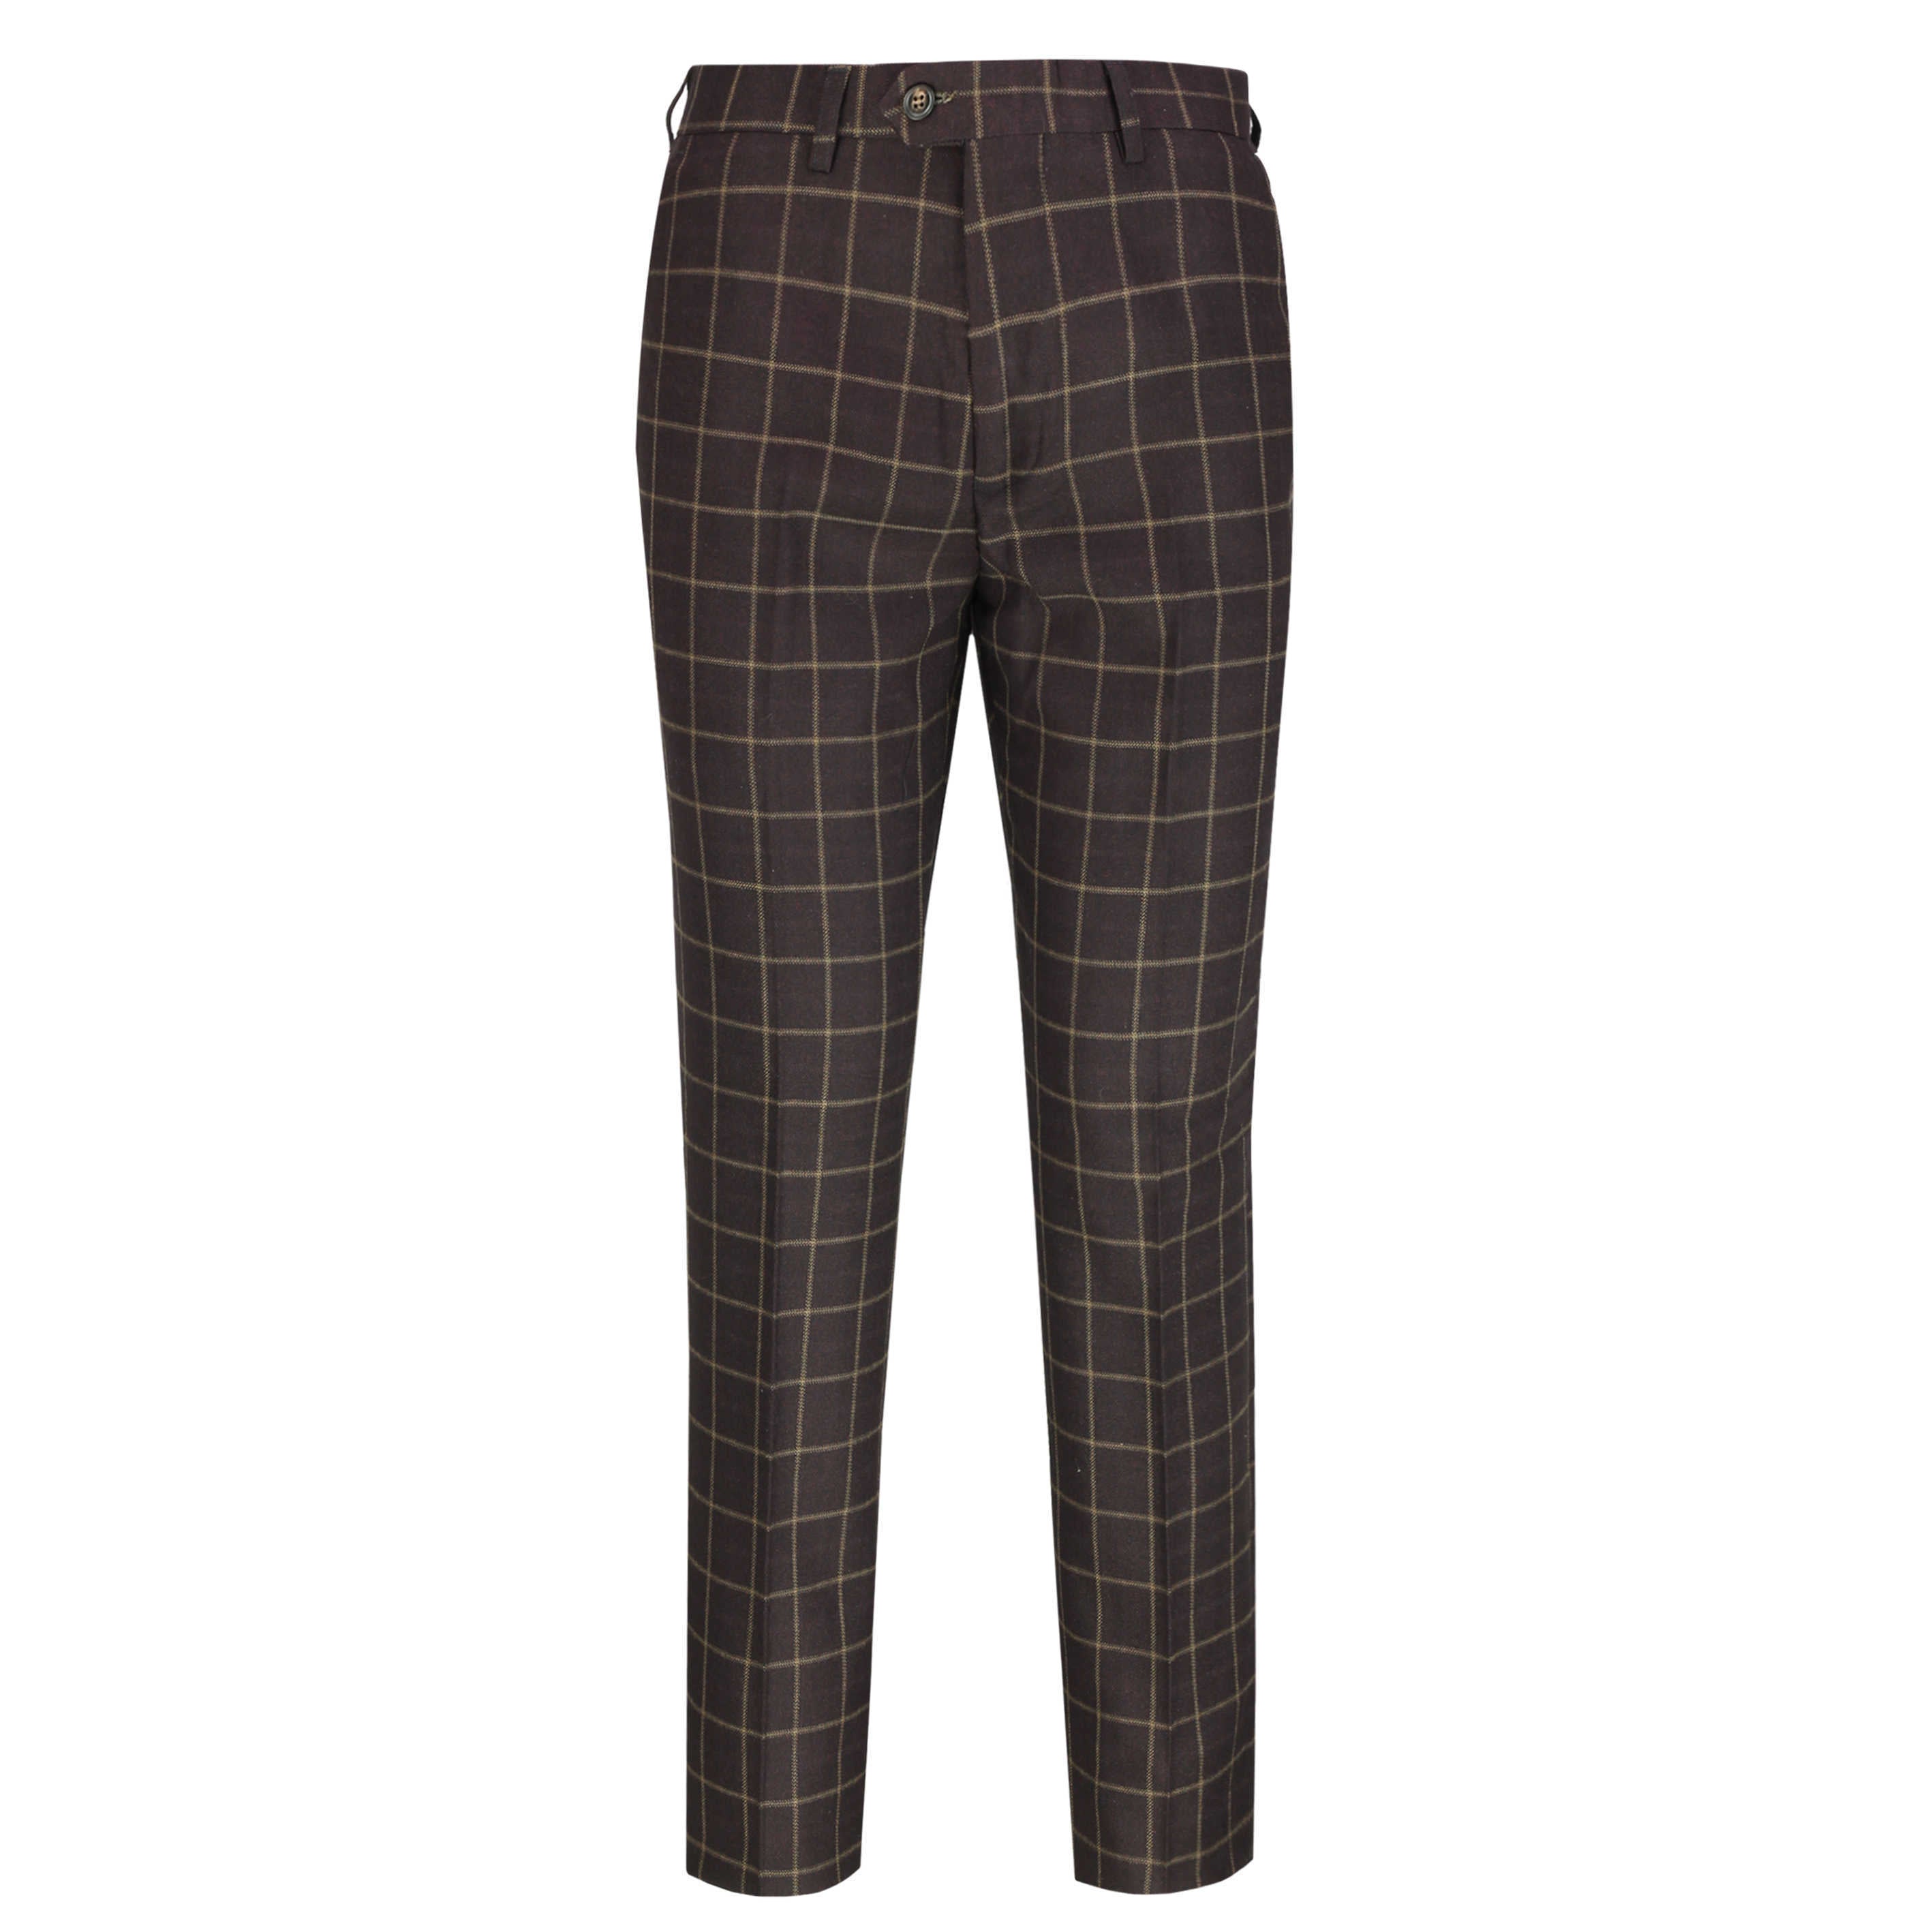 Mens Brown Windowpane Check Trousers Retro Vintage Slim Tailored Fit Suit Pants